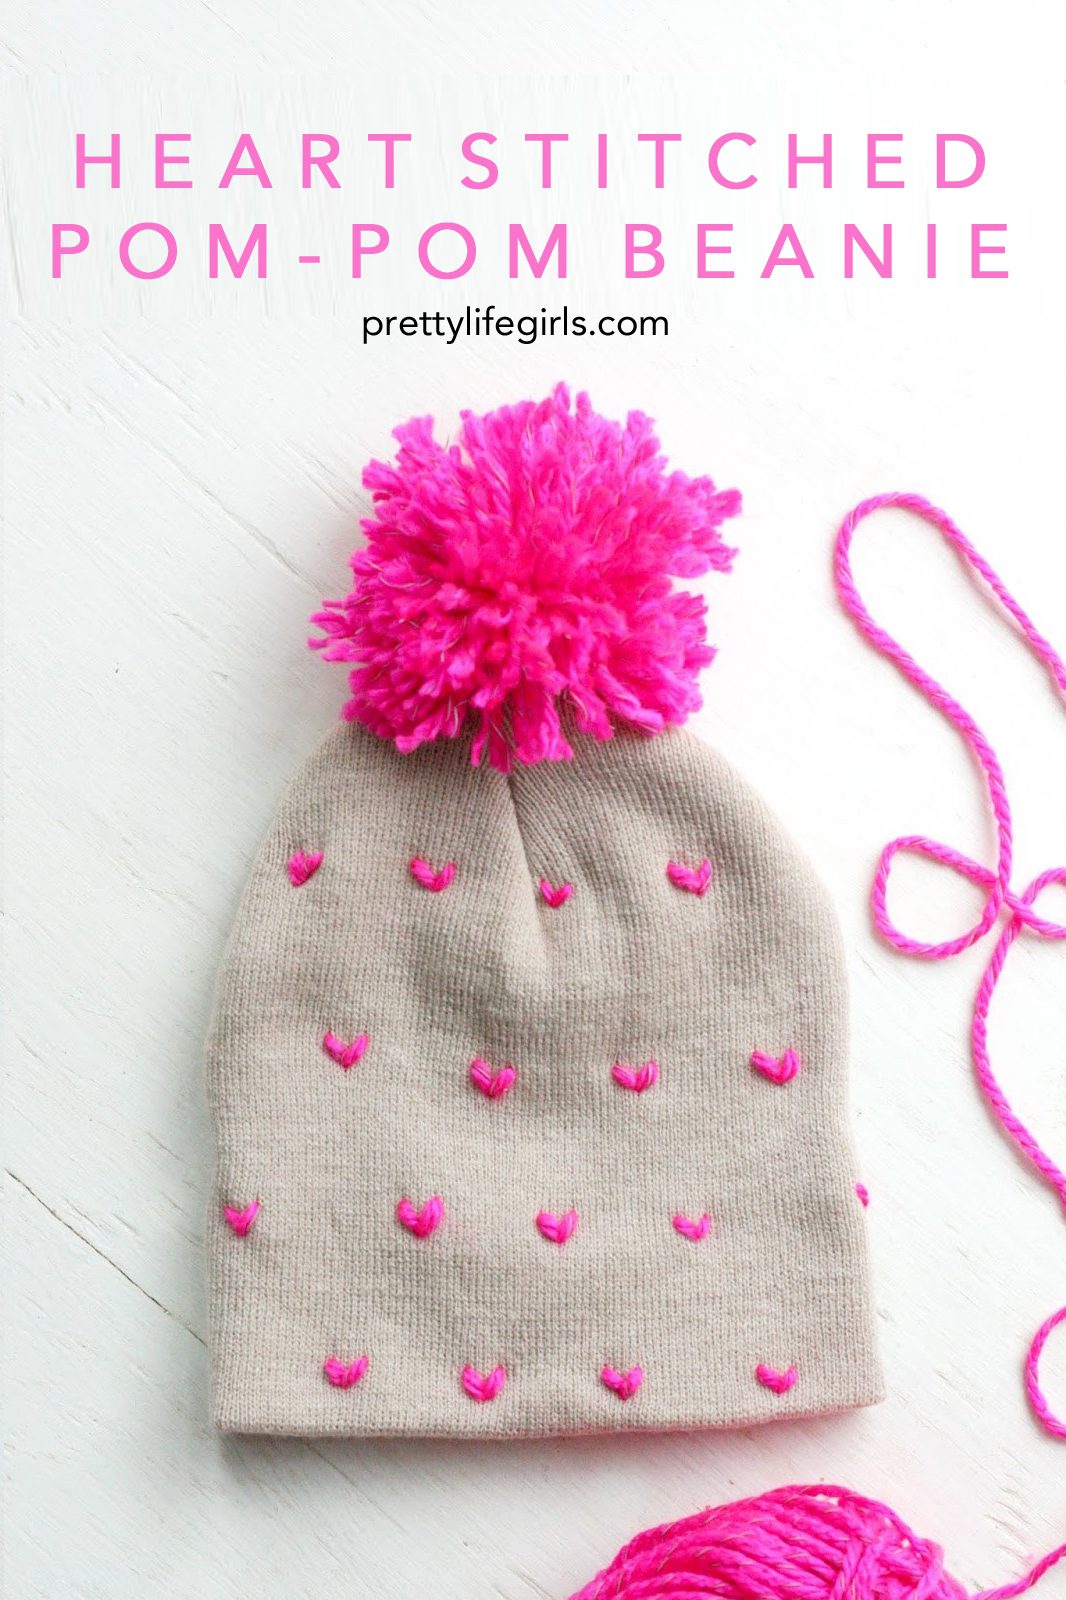 DIY Heart-Patterned Pom Pom Beanie + featured by Top US Craft Blog + The Pretty Life Girls